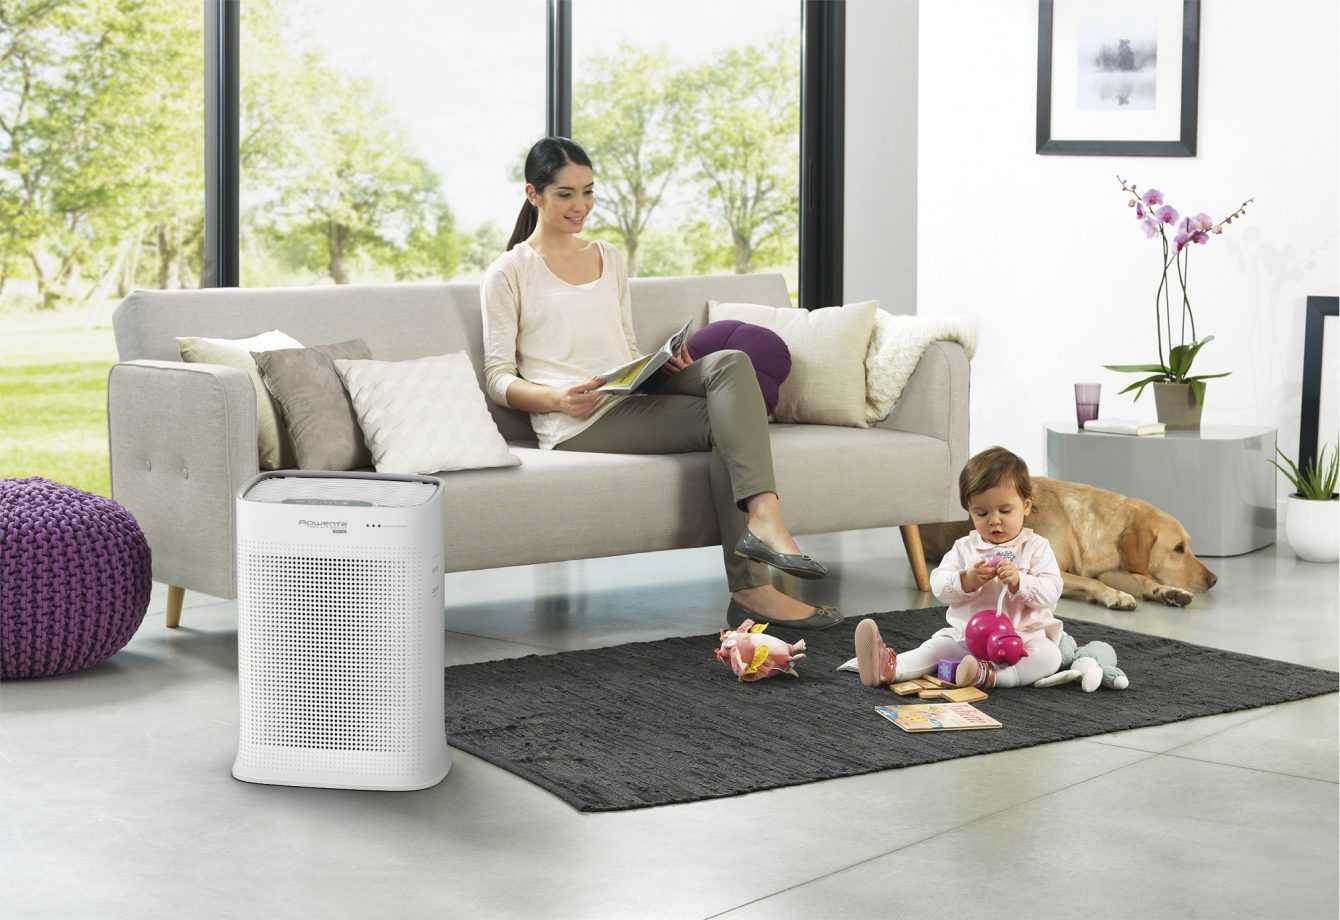 Rowenta CUBE: solutions to sanitize the home